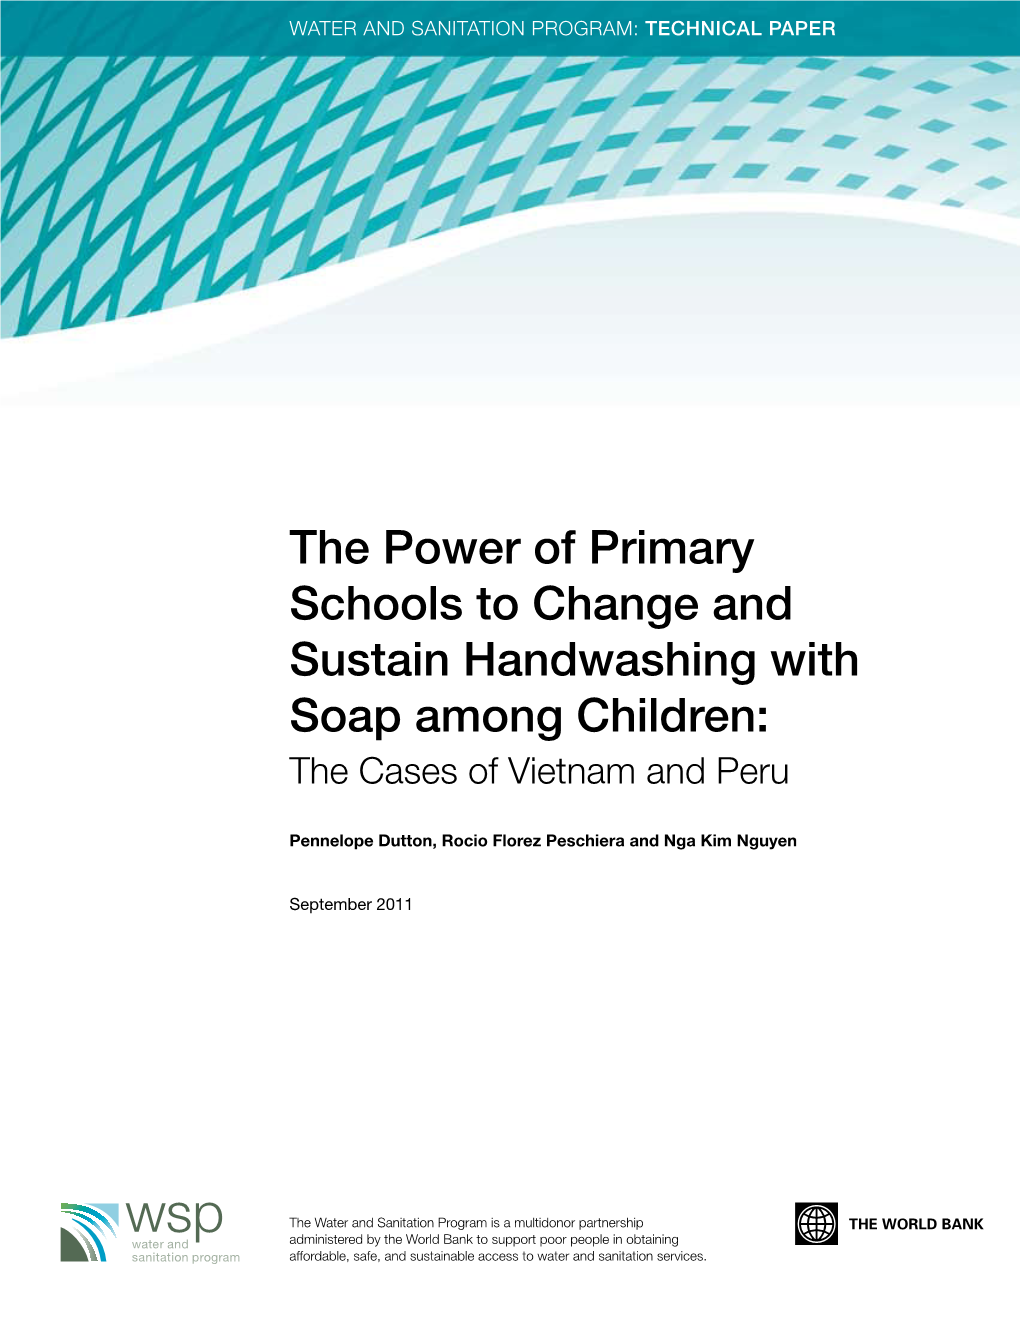 The Power of Primary Schools to Change and Sustain Handwashing with Soap Among Children: the Cases of Vietnam and Peru